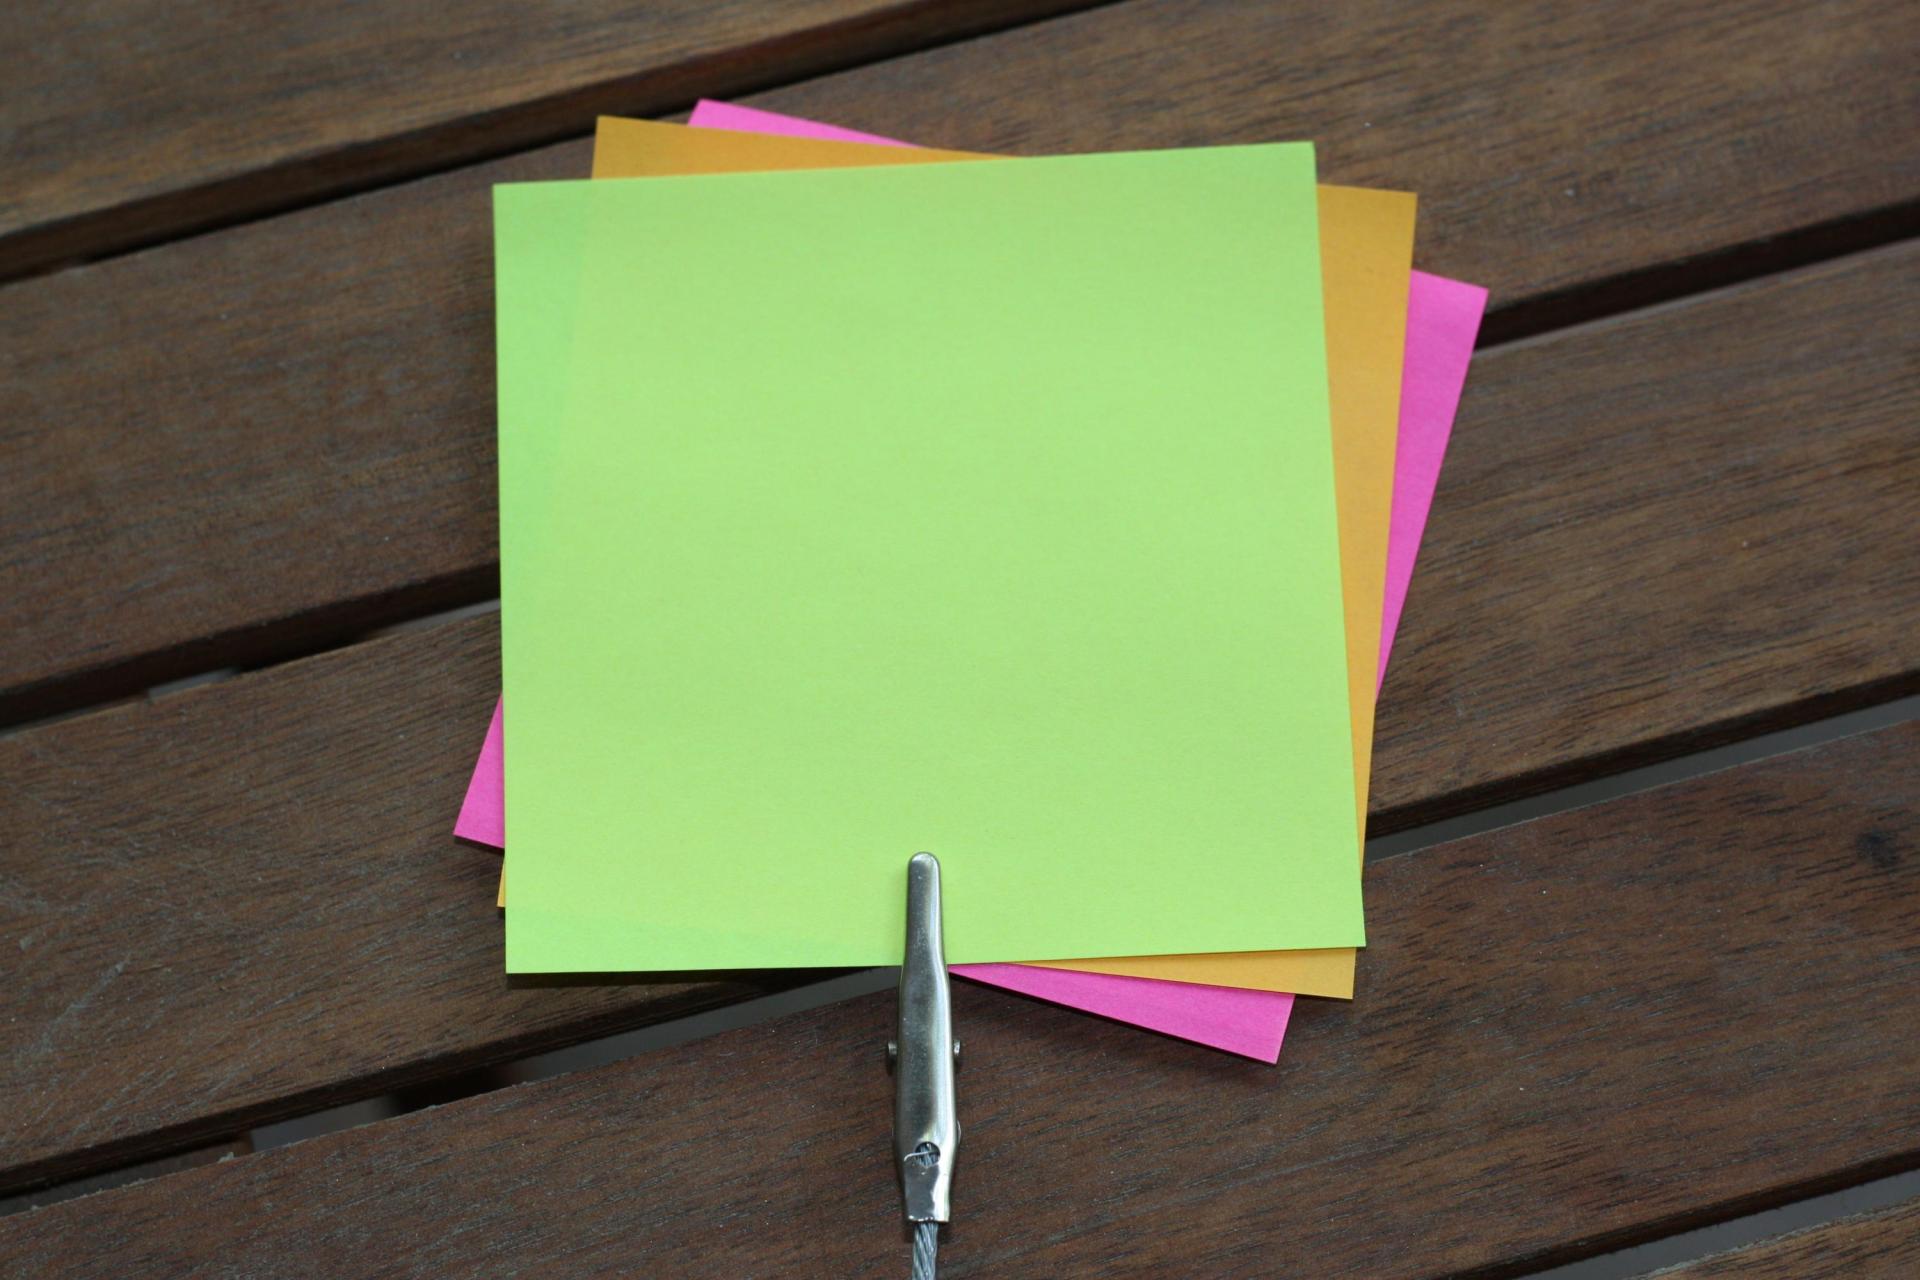 A stack of post-it notes.